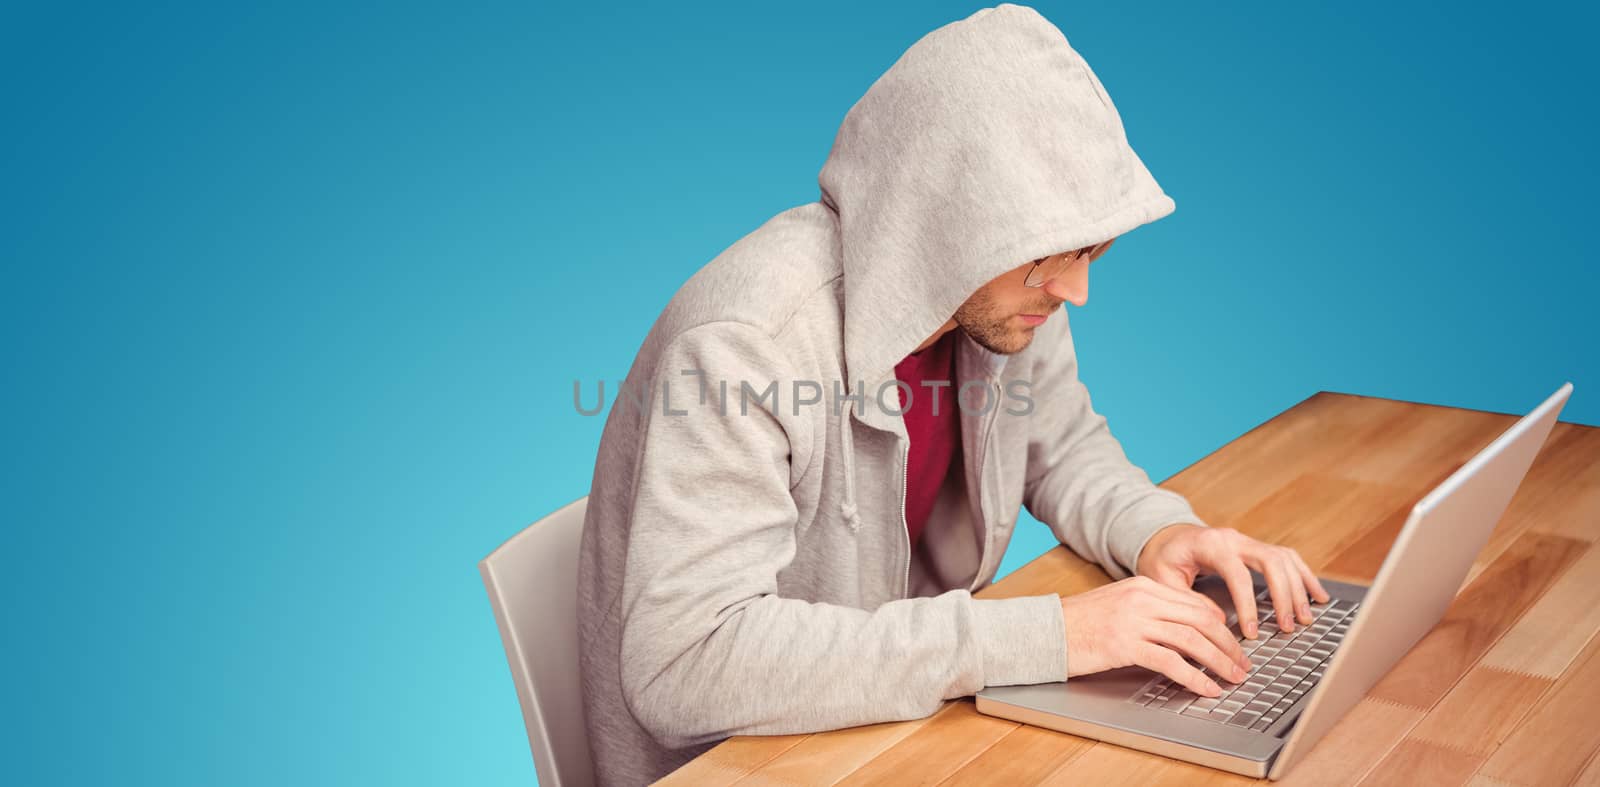 Businessman with hooded shirt working on laptop against blue vignette background